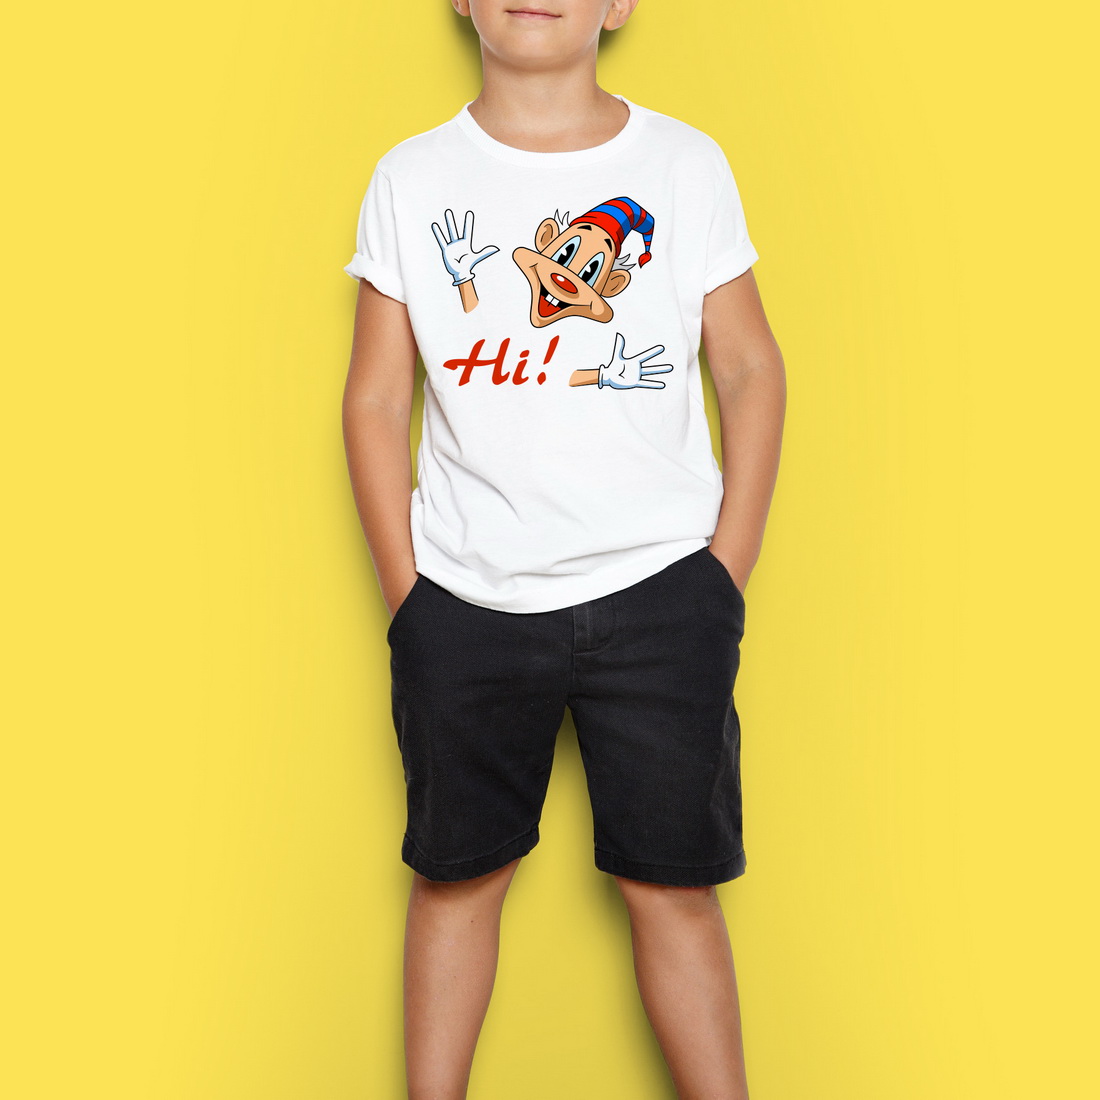 Young boy standing in front of a yellow background.